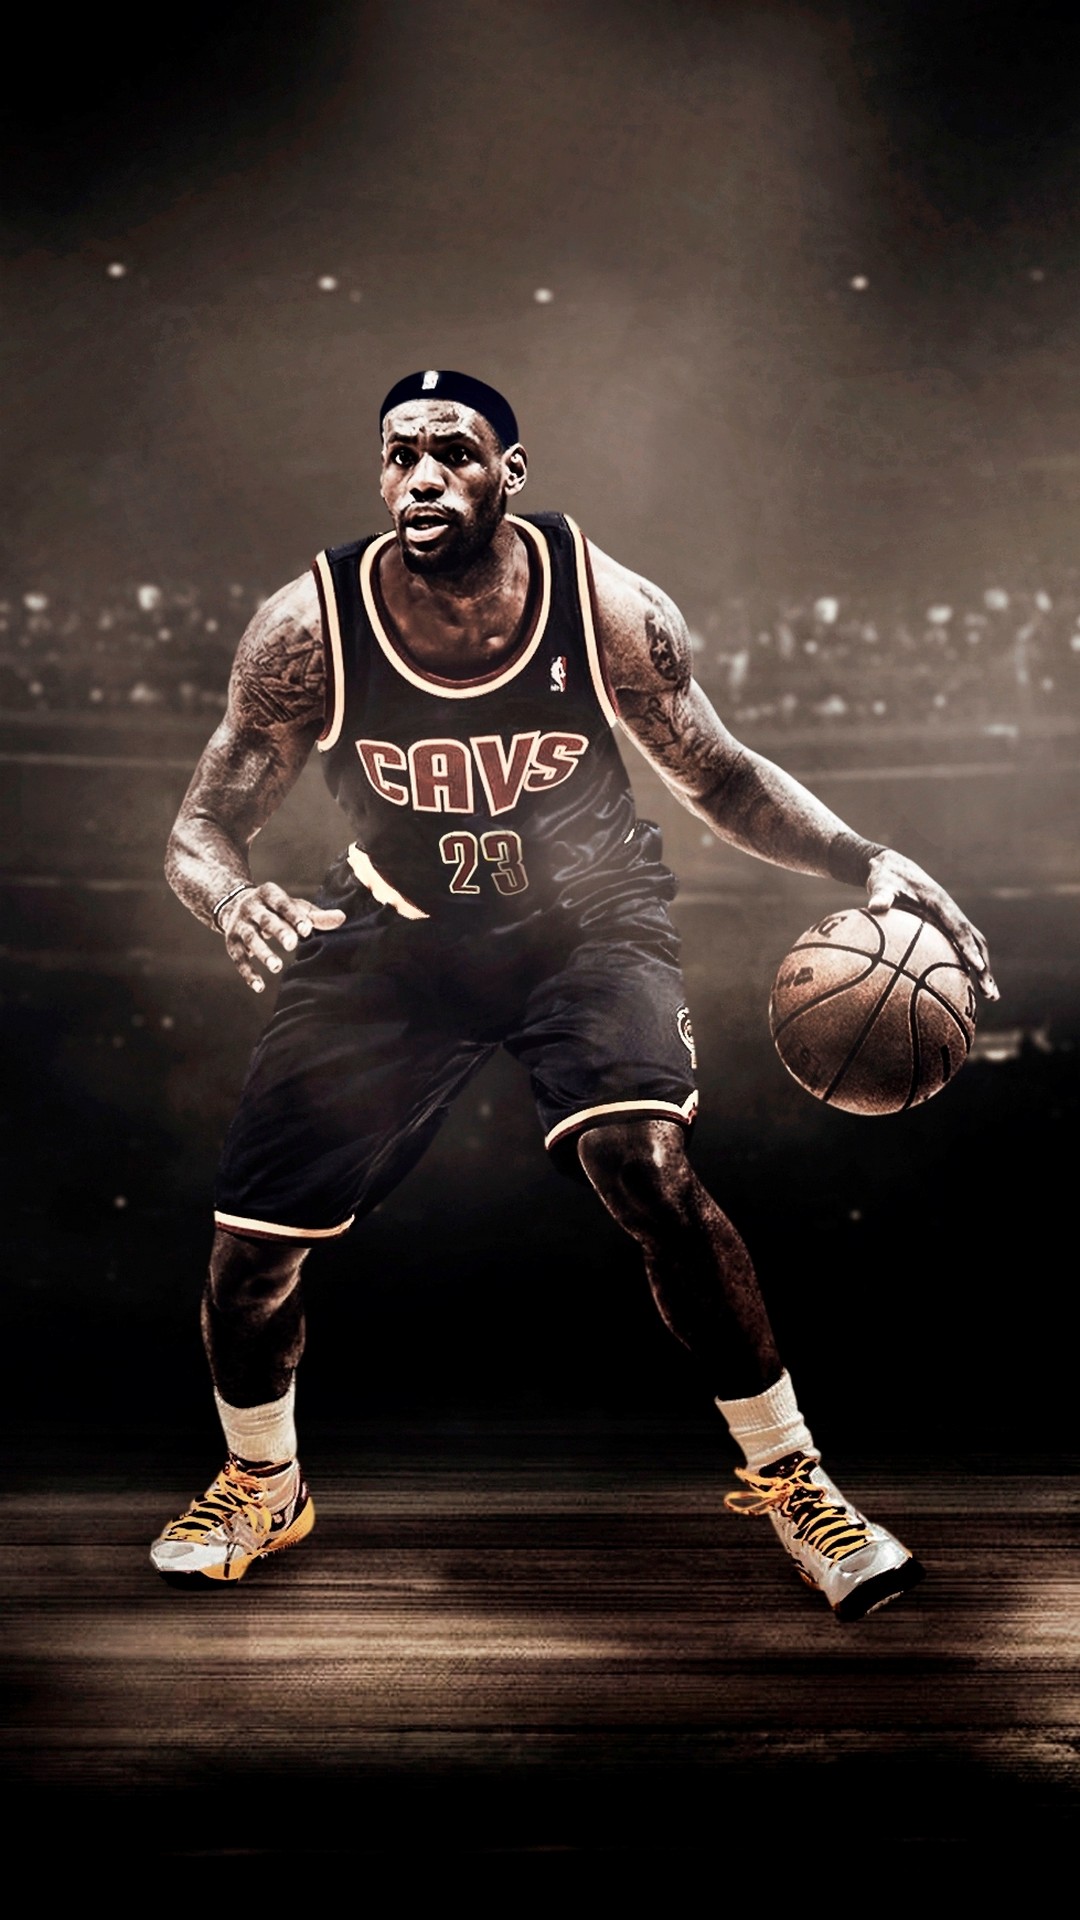 Cleveland Cavaliers LeBron James iPhone Wallpaper resolution 1080x1920